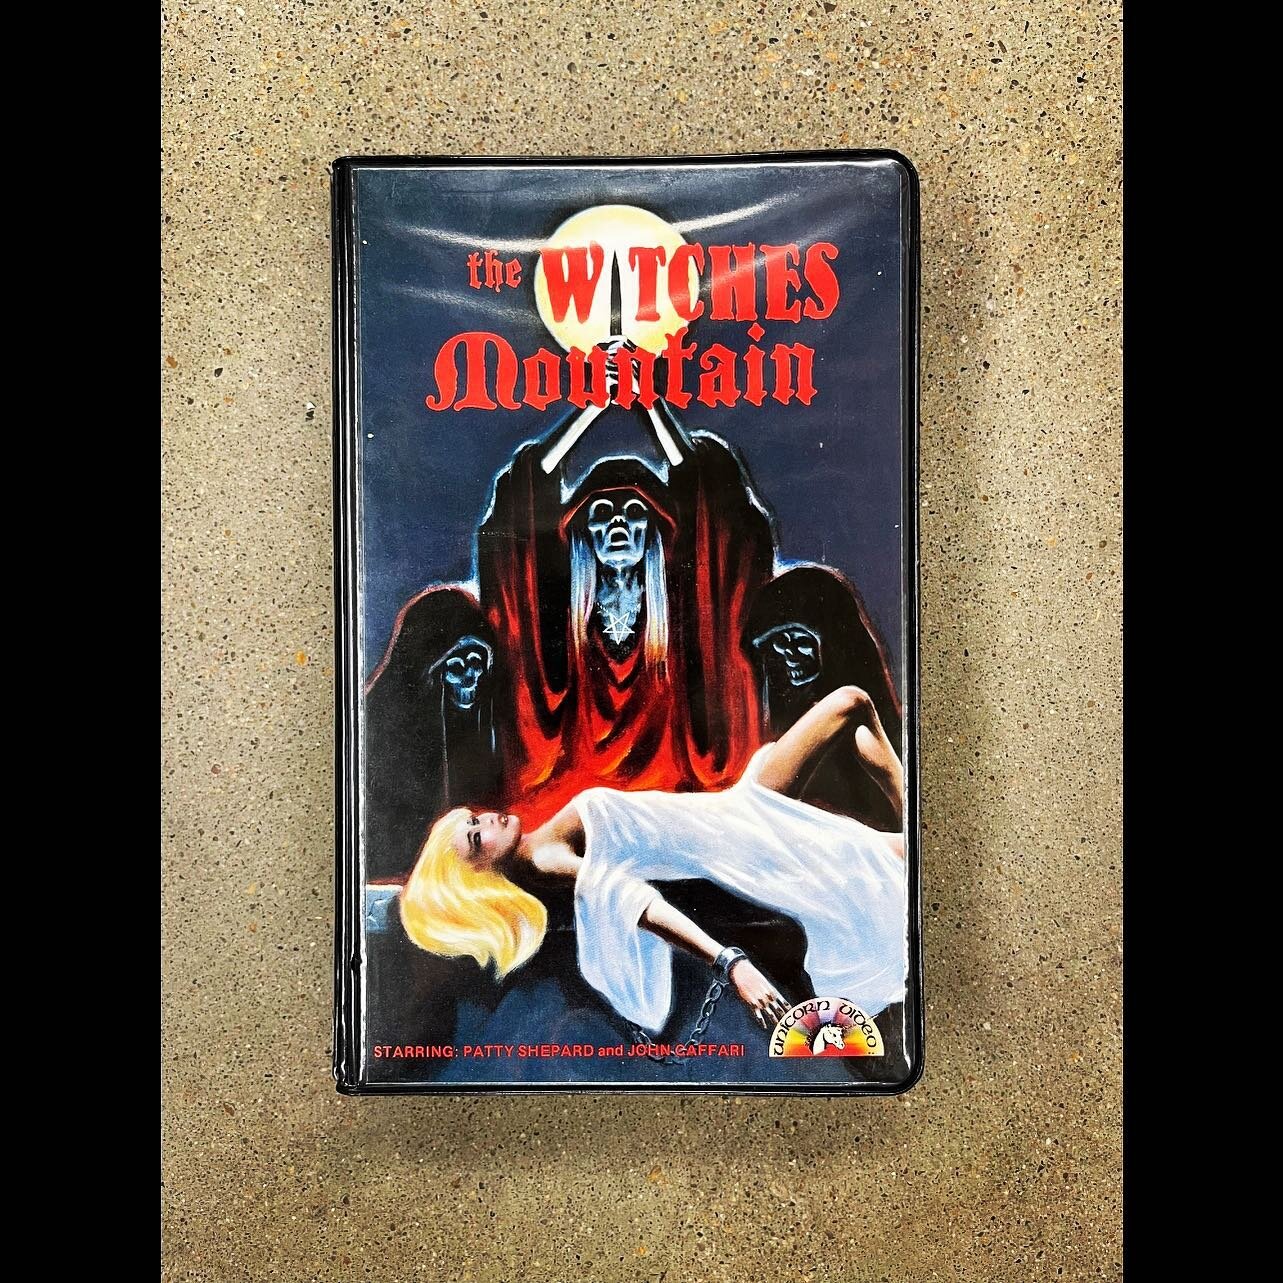 Just an absolute beauty&hellip;

Witches Mountain AKA El Monte de las brujas (original title) (1973) directed by Raul Artigot. 

#spanishhorror #sealedvhs #sealedbetamax #psychotronicfilm #witchcoven #unicornvideo #sealedforyourprotection #vhscollect